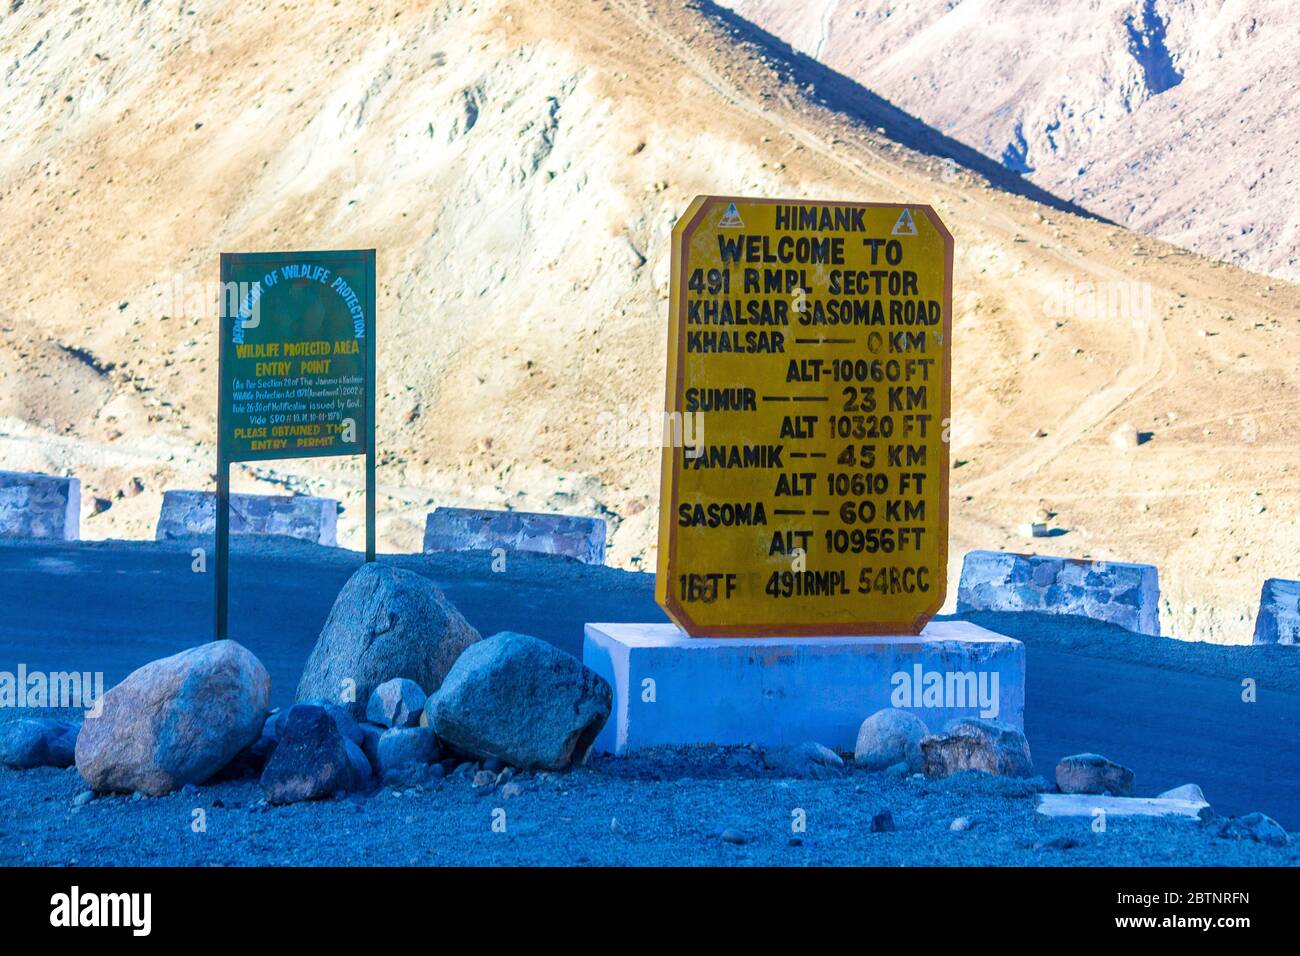 HIMANK - The sign board management committee greets ' WELCOME TO 491 RMPL sector Khalsar', Ladakh, Jammu & Kashmir, India, Asia. Stock Photo